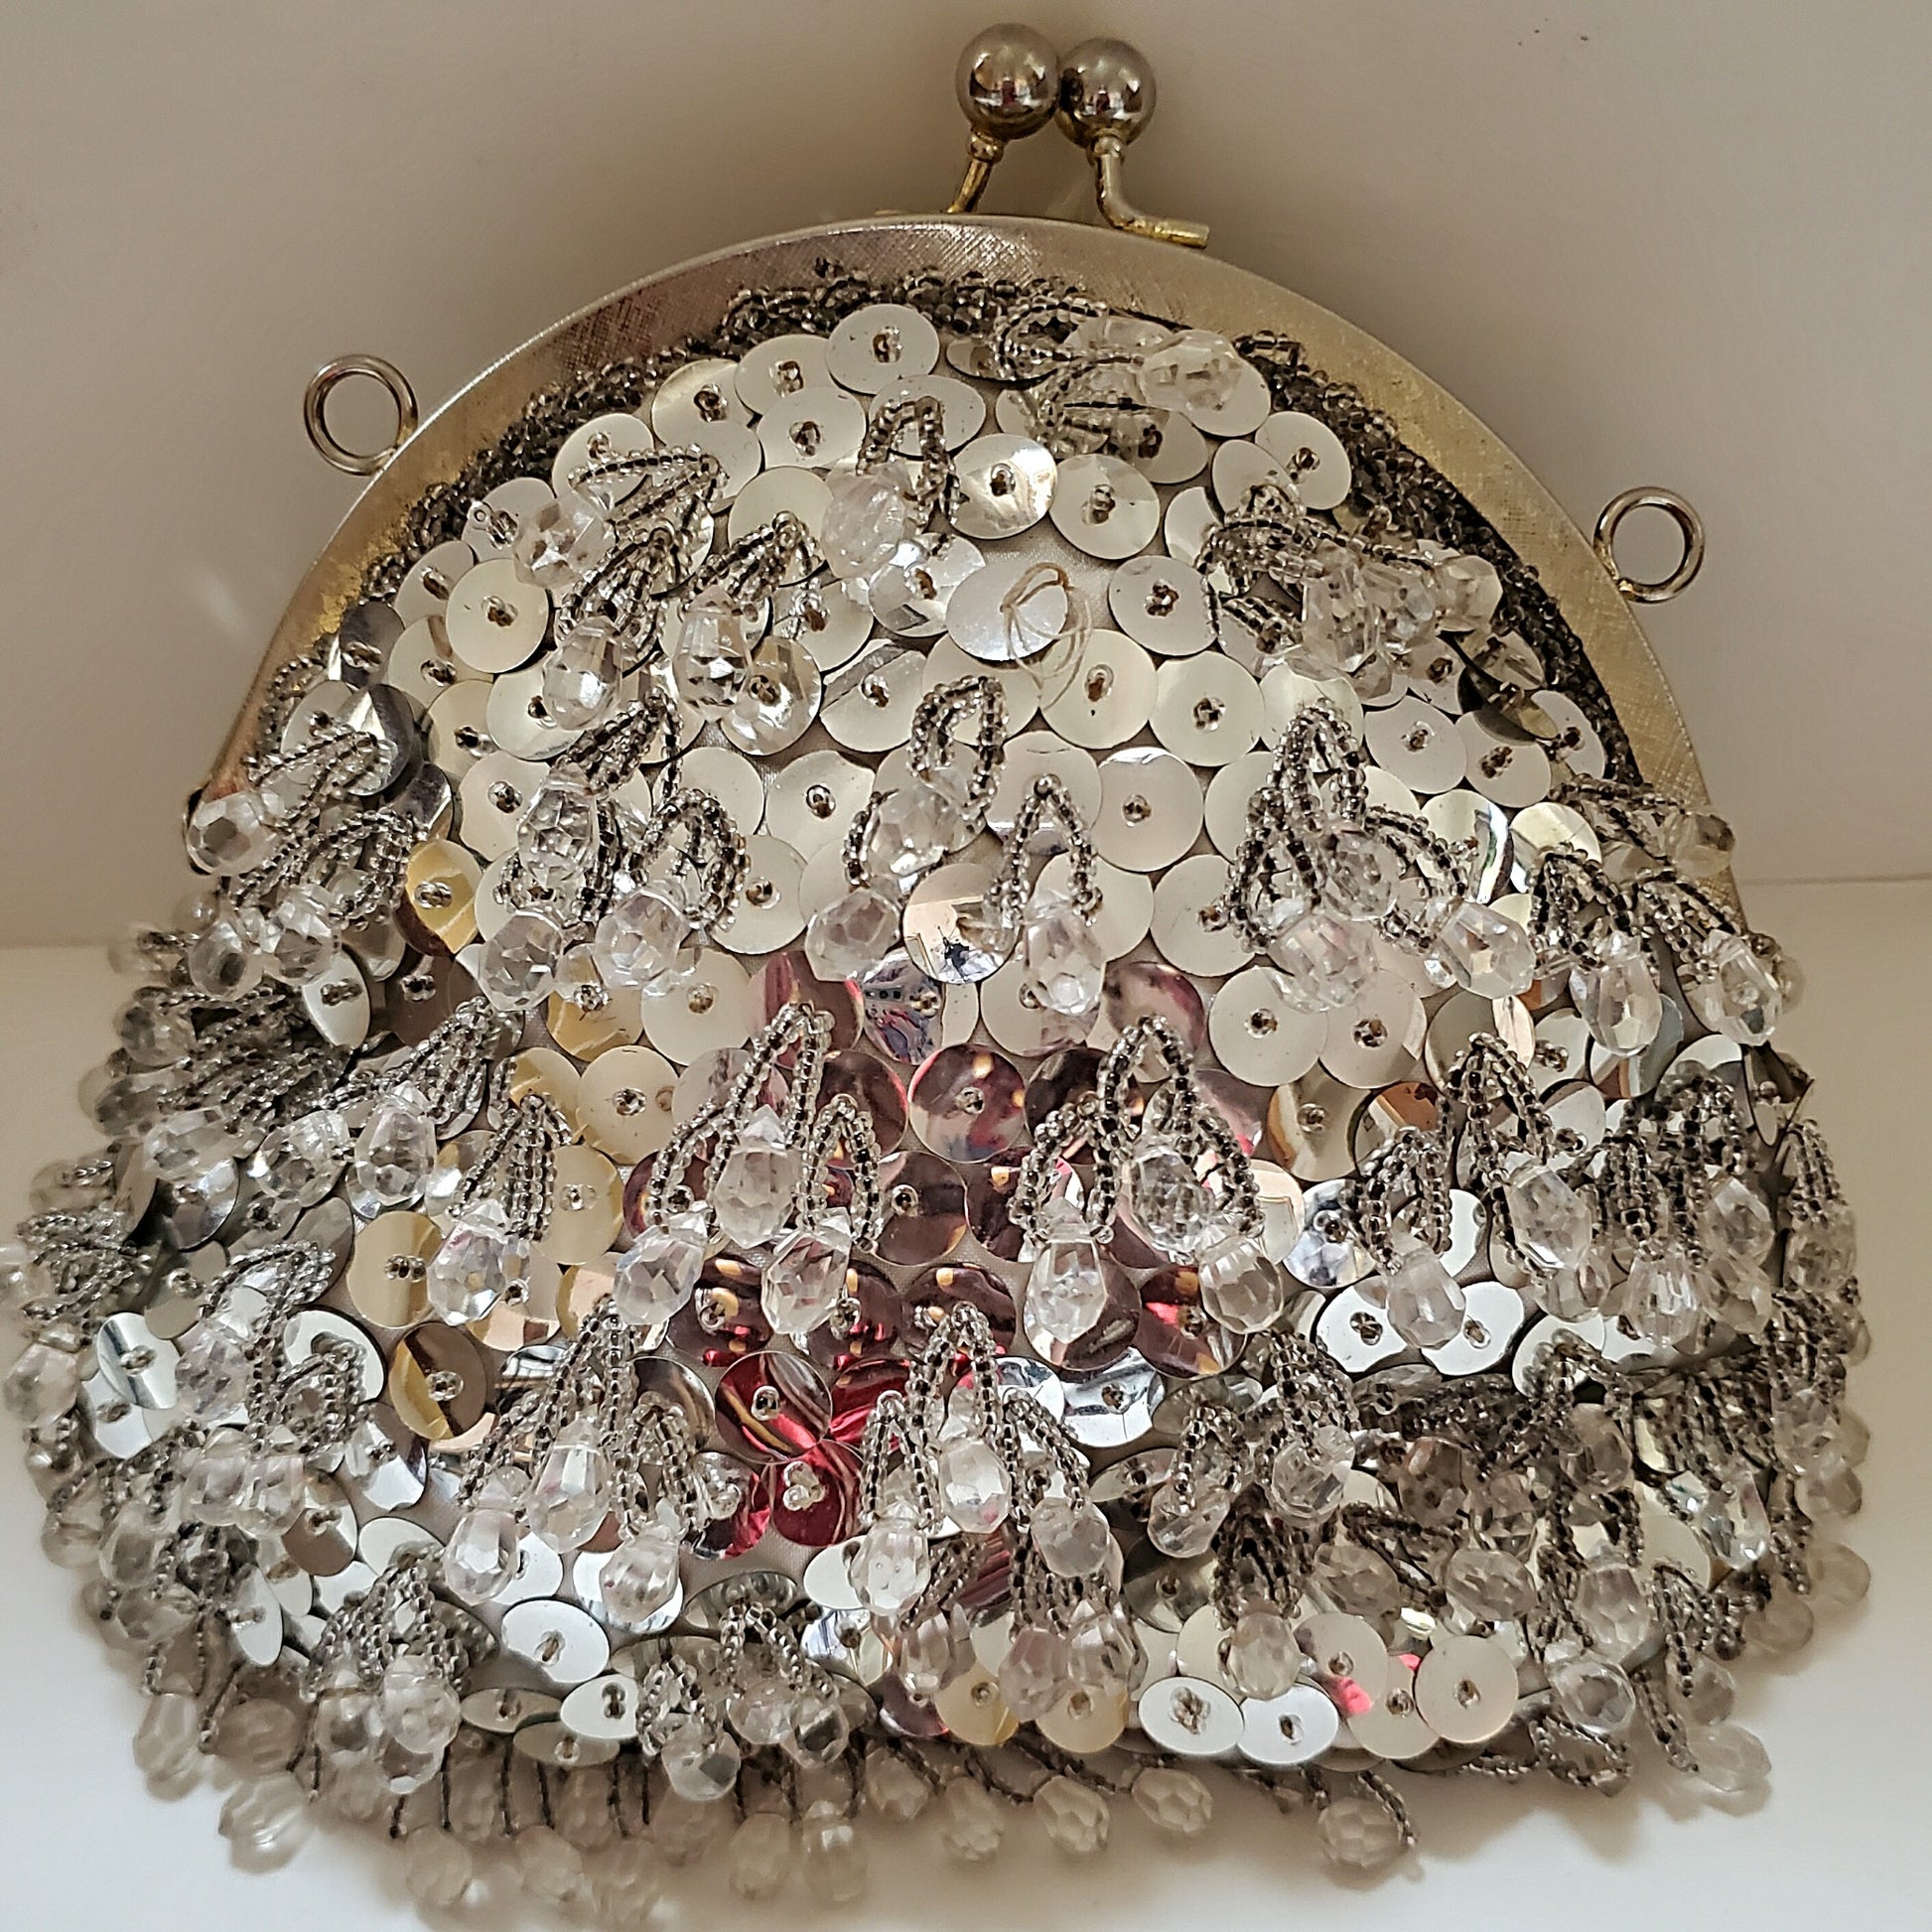 Vintage Shimmy Clutch Bag- Vedazzling Accessories